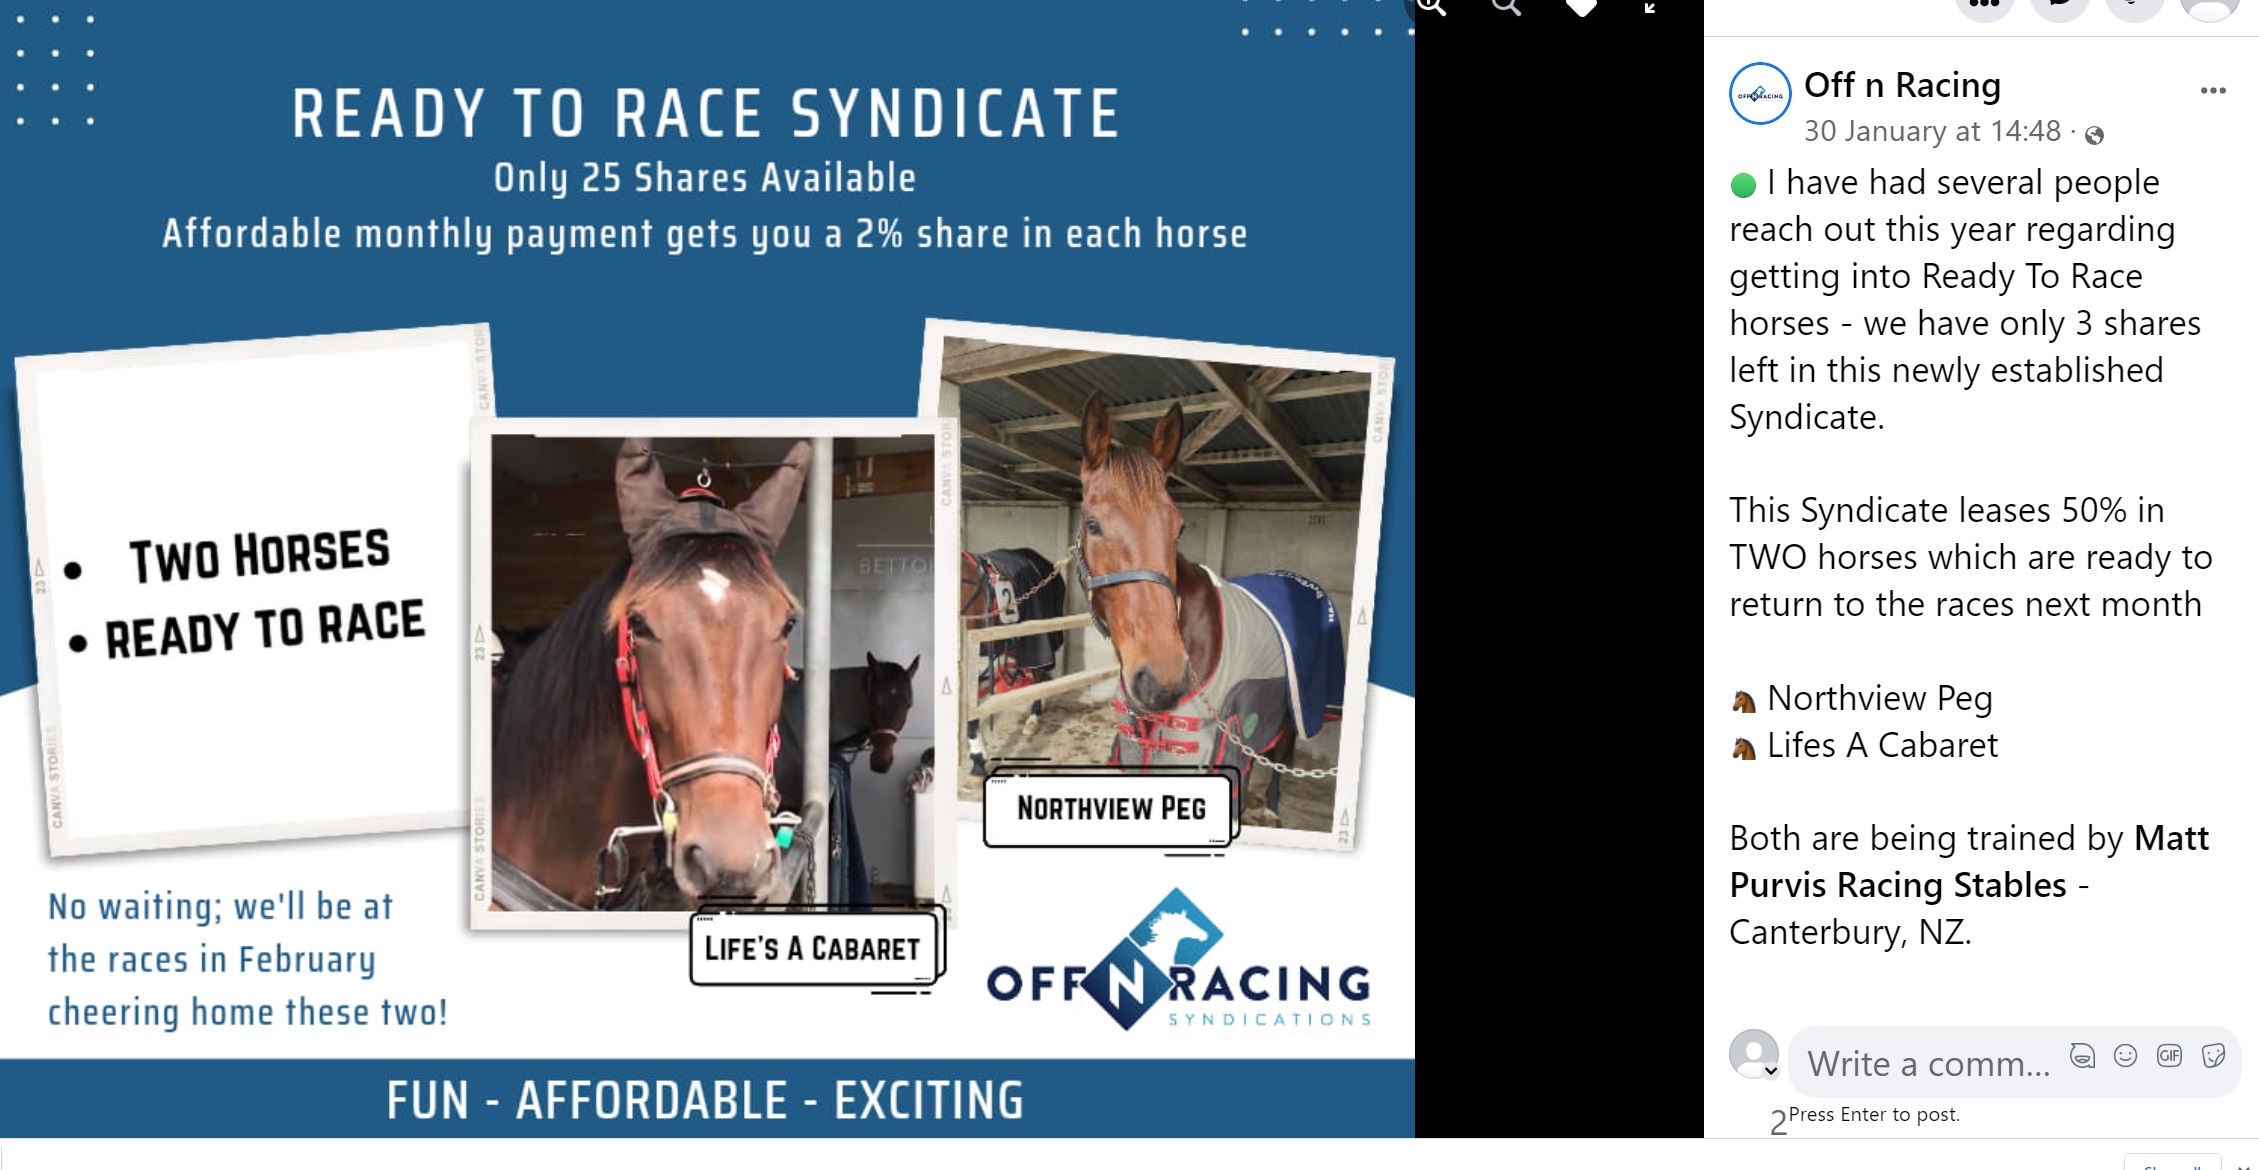 How Do You Syndicate a Horse That Isn’t Yours? – And How Do You Syndicate One That You’ve Already Syndicated Only 8 Months Before?